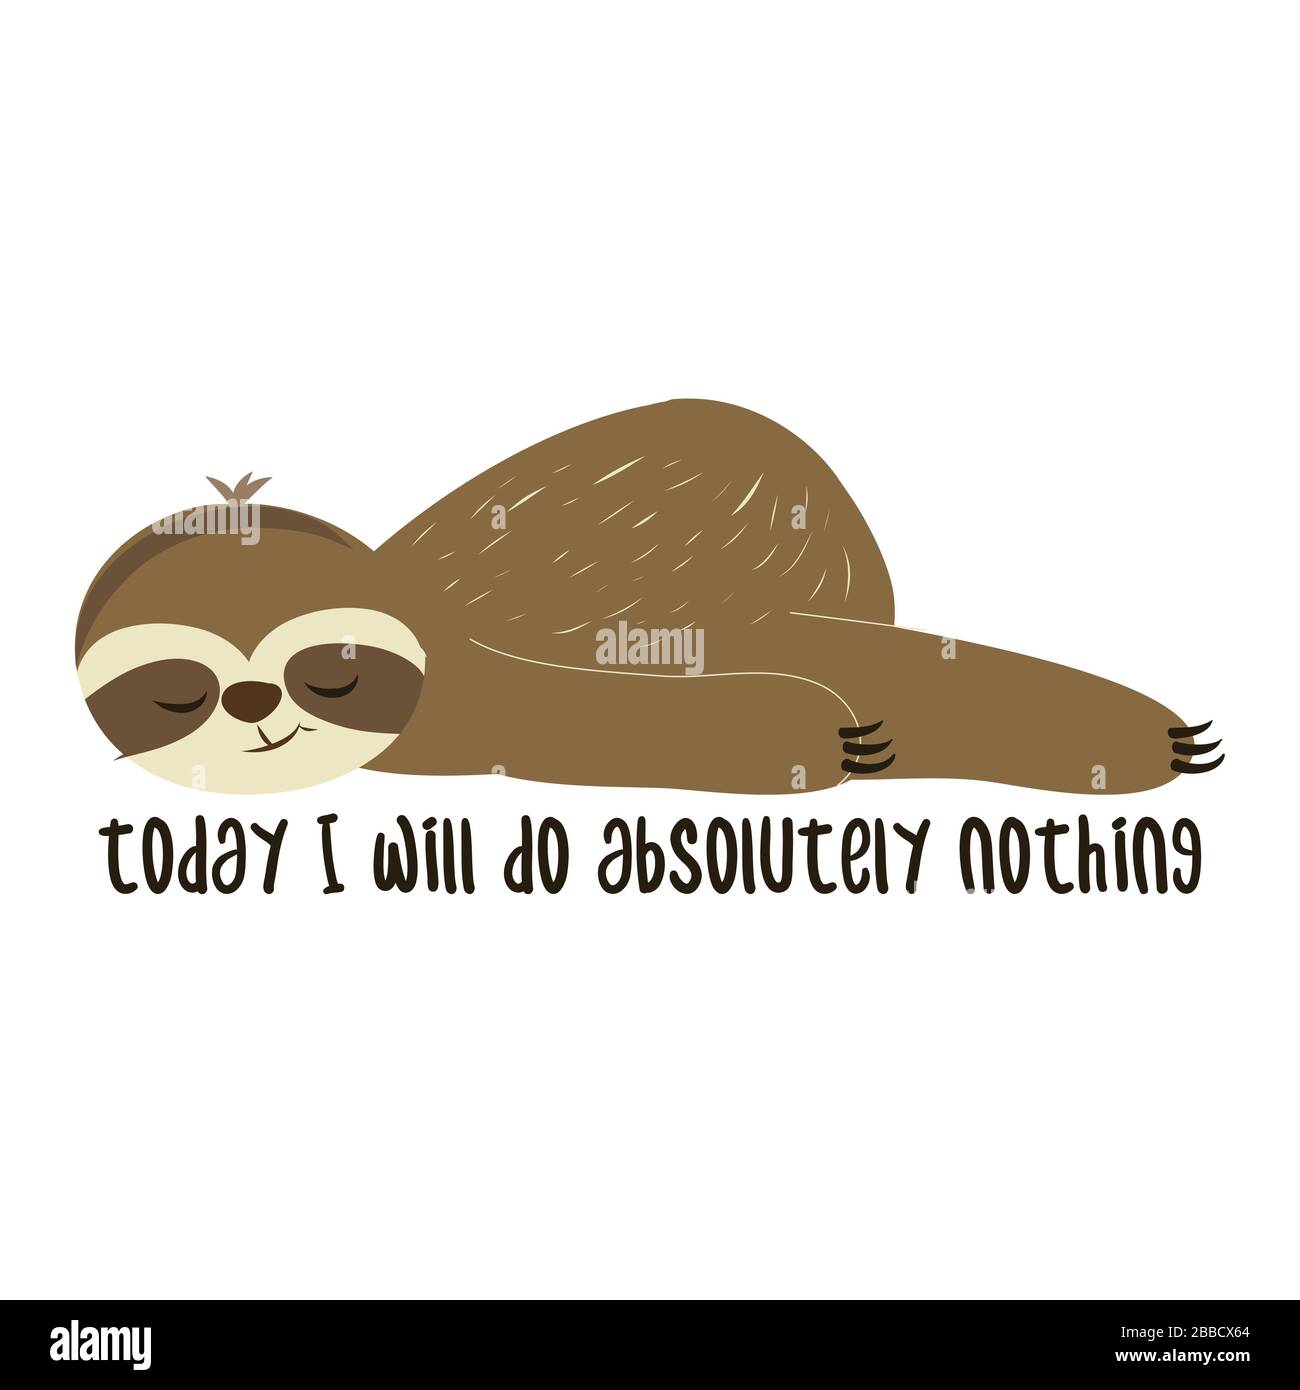 Today I will do absolutely nothing - Greeting card for stay at home for quarantine times. Hand drawn cute sloth. Good for t-shirt, mug, scrap booking, Stock Vector